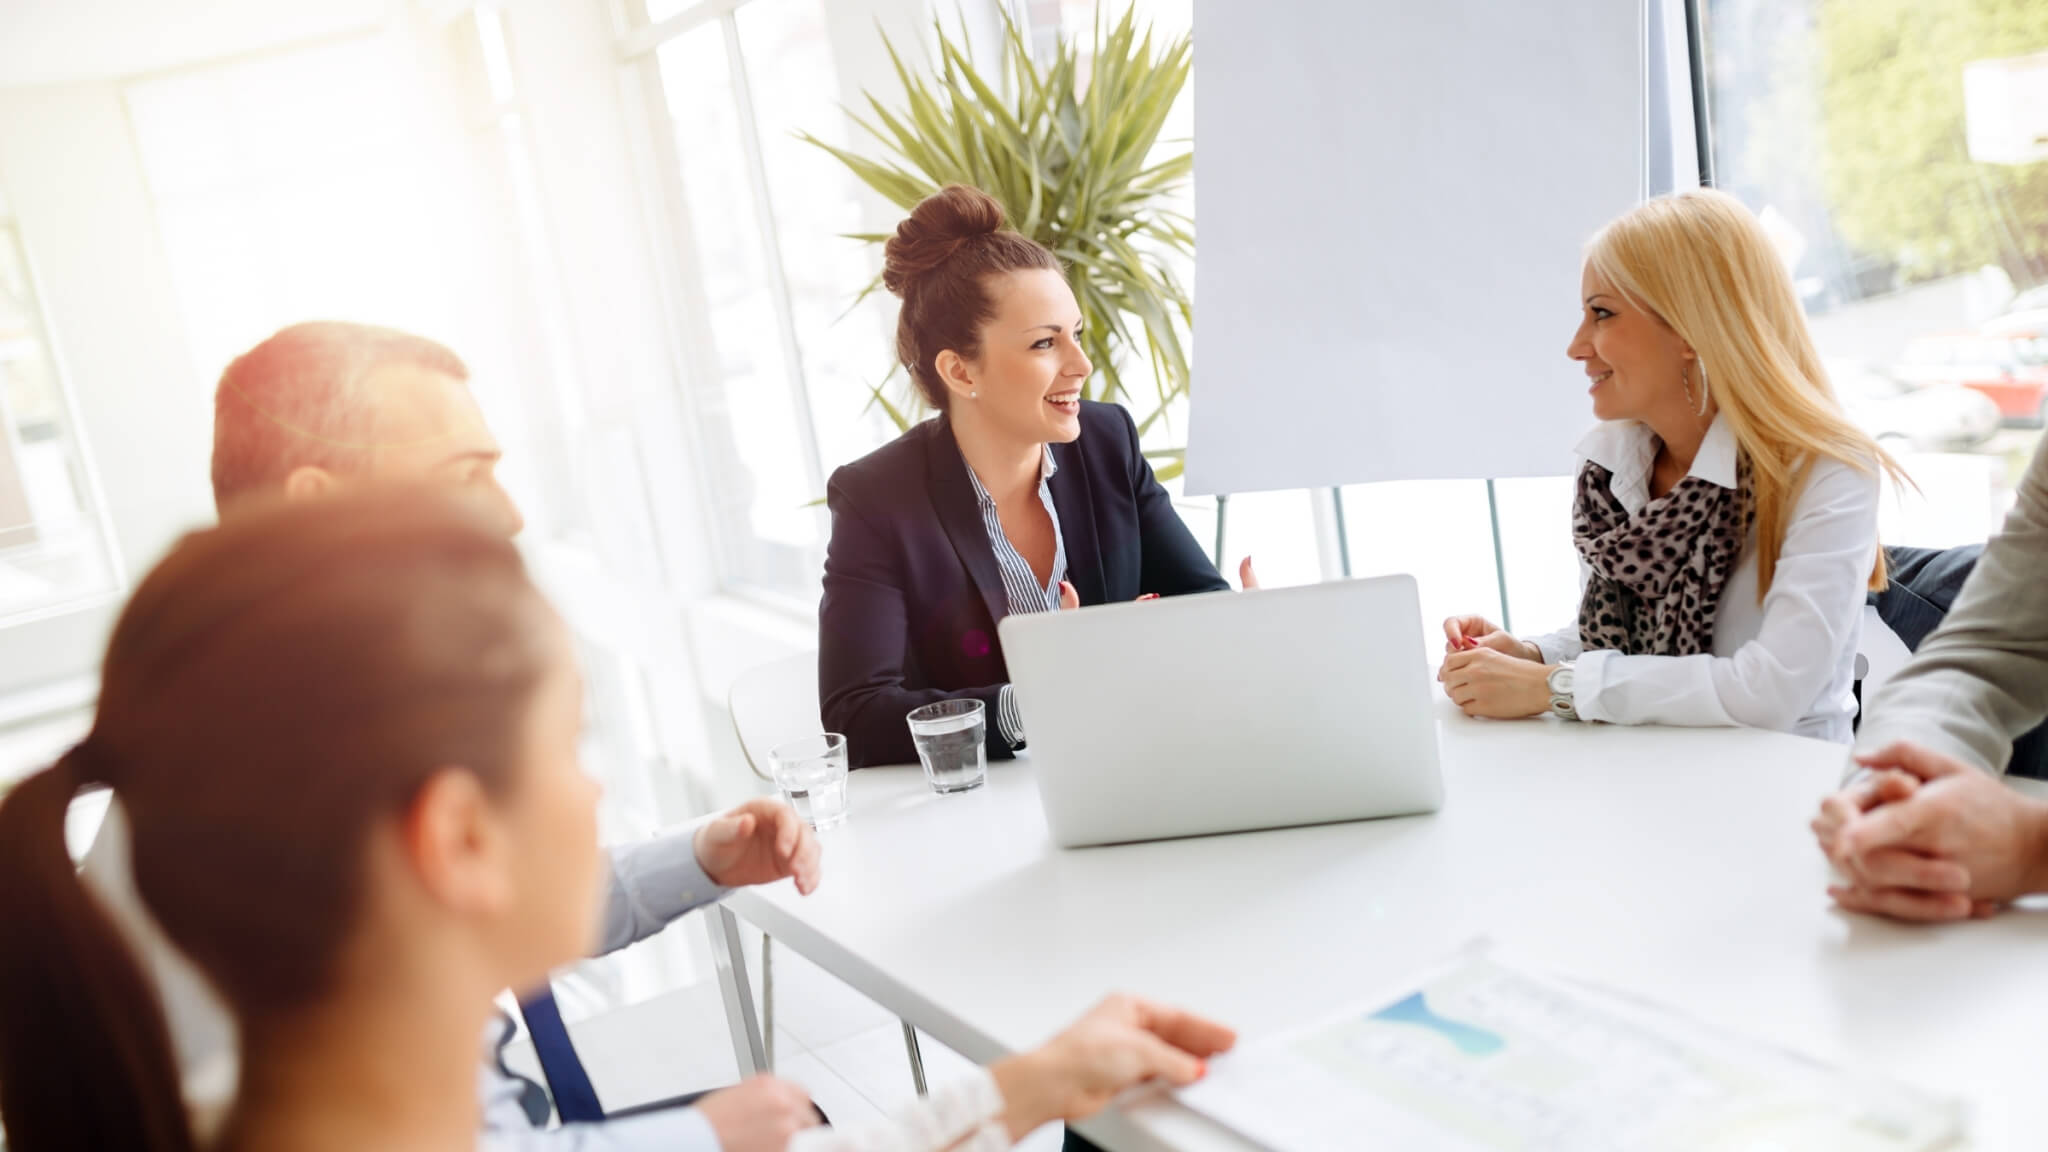 How to Conduct a Board Meeting Effectively